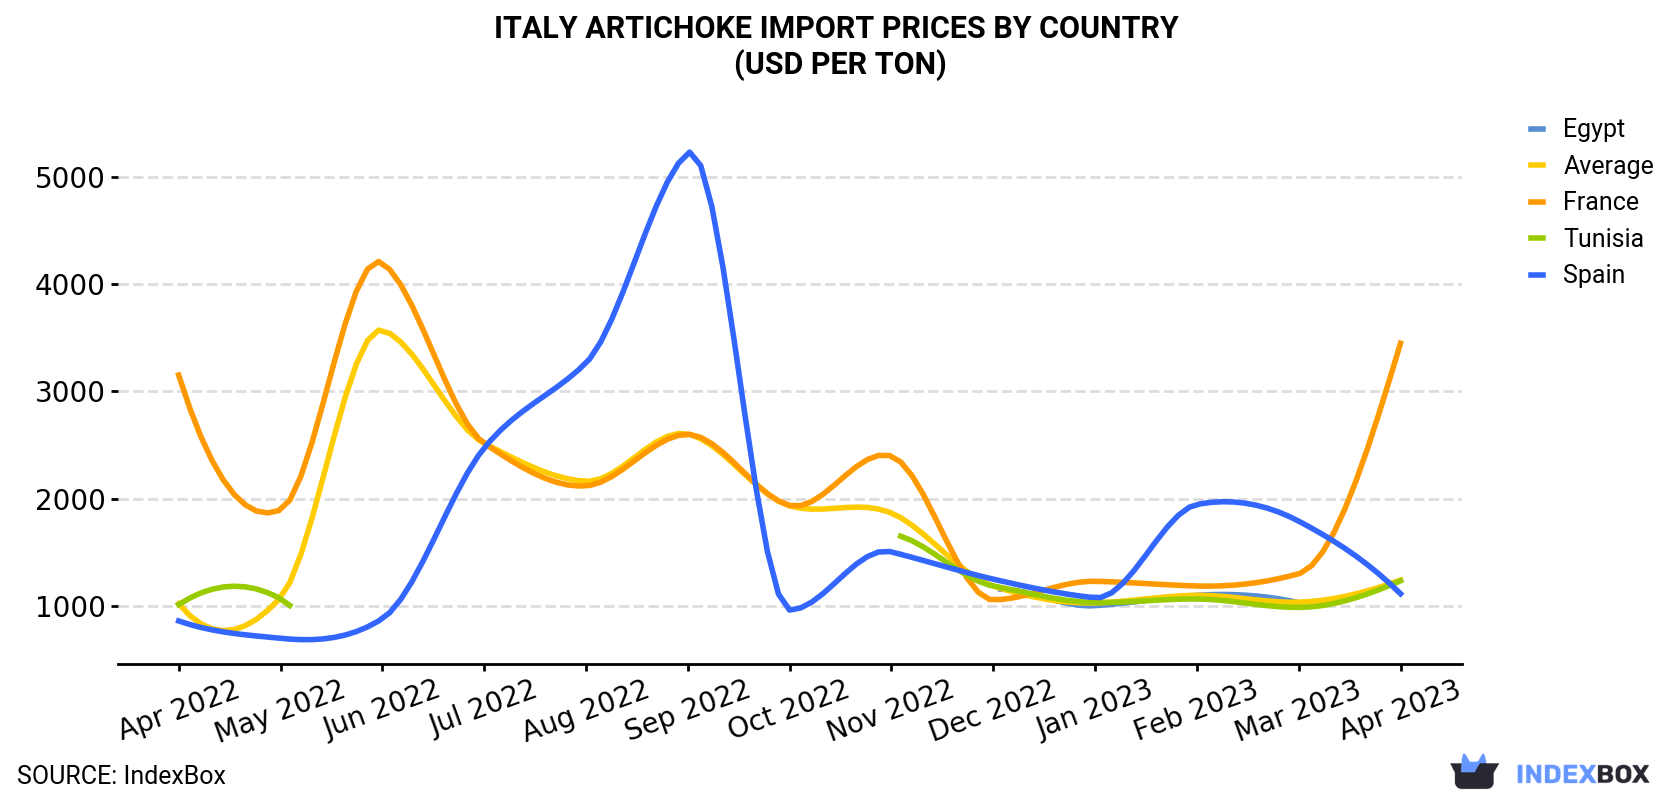 Italy Artichoke Import Prices By Country (USD Per Ton)